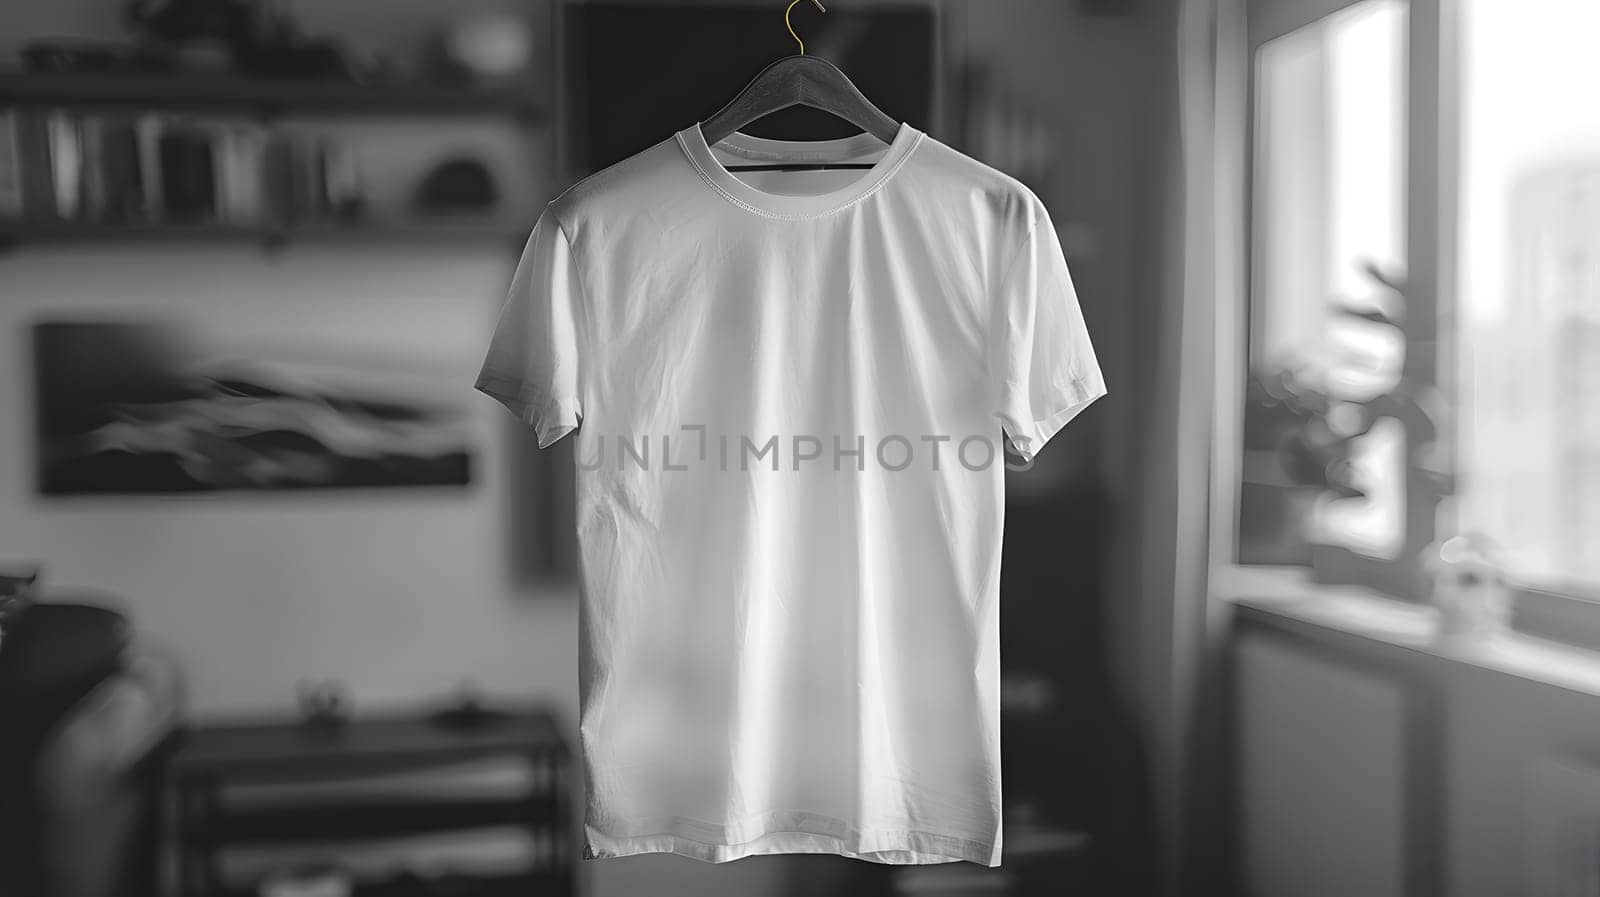 A grey tshirt, with short sleeve, hangs on a hanger in a room. The monochrome photography highlights the sleek font of the sportswear design